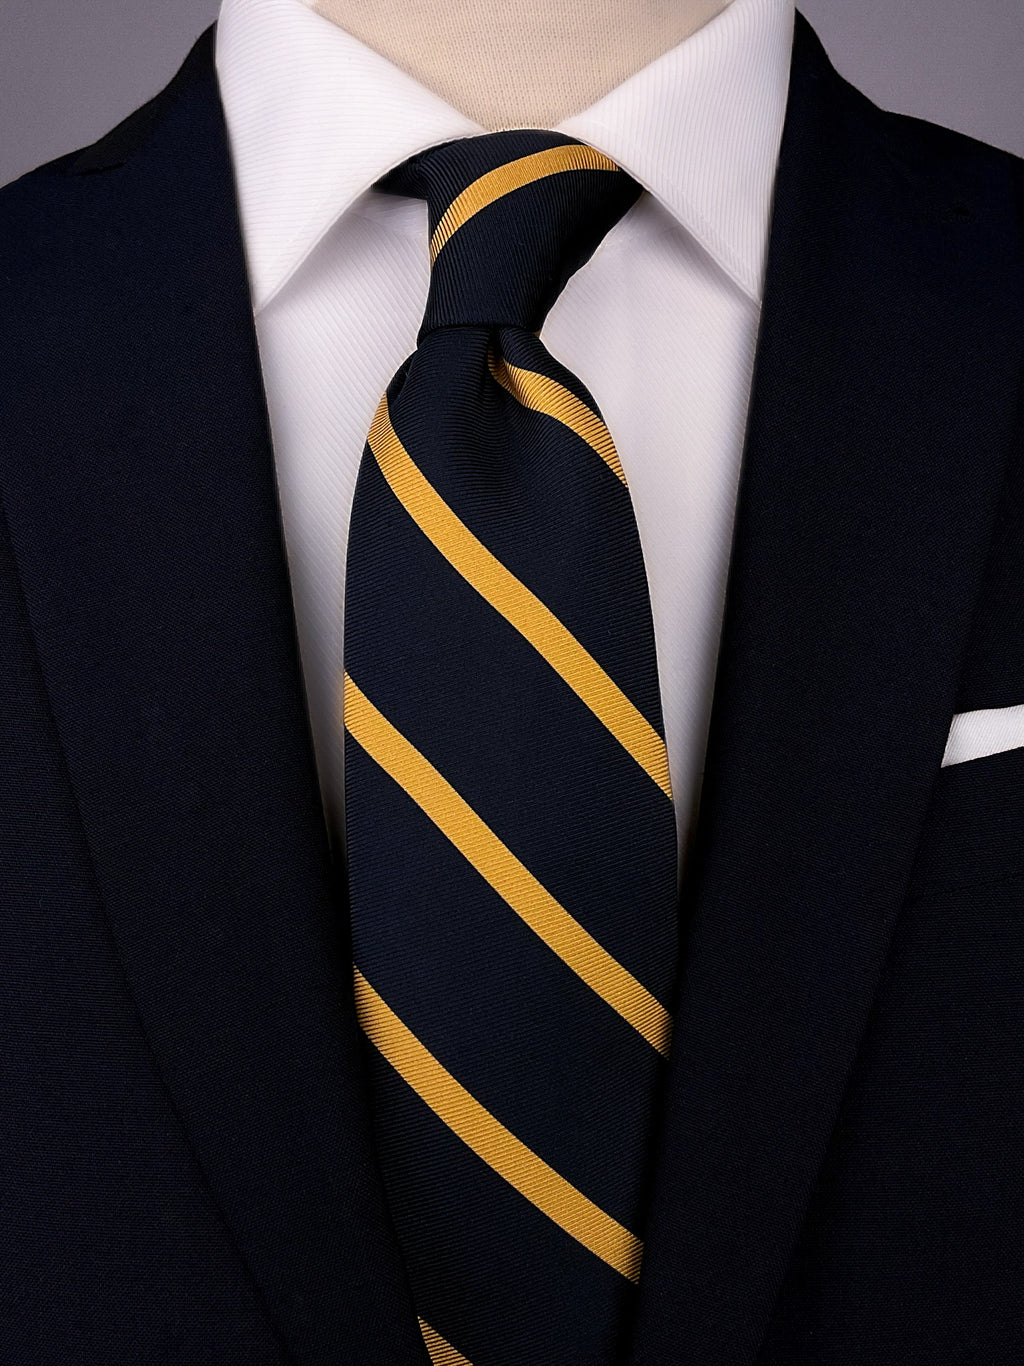 Navy blue and yellow striped silk Regimental tie worn with a white shirt and a navy blue suit.